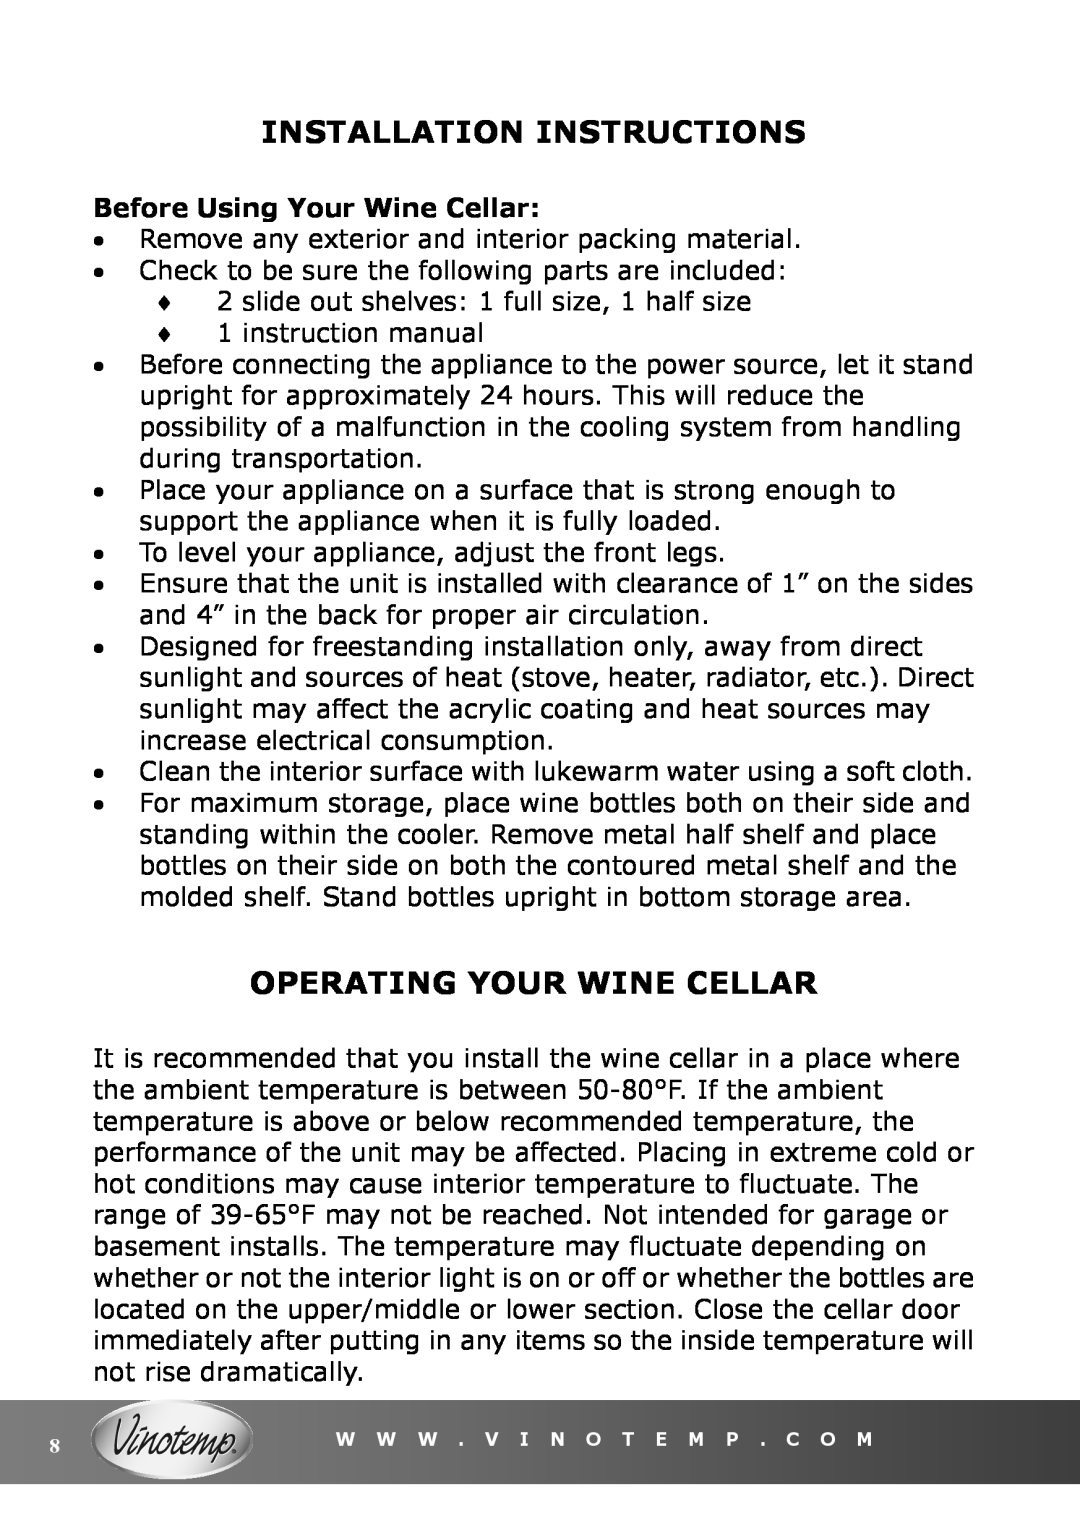 Vinotemp VT-15 TS owner manual Installation Instructions, Operating Your Wine Cellar, Before Using Your Wine Cellar 